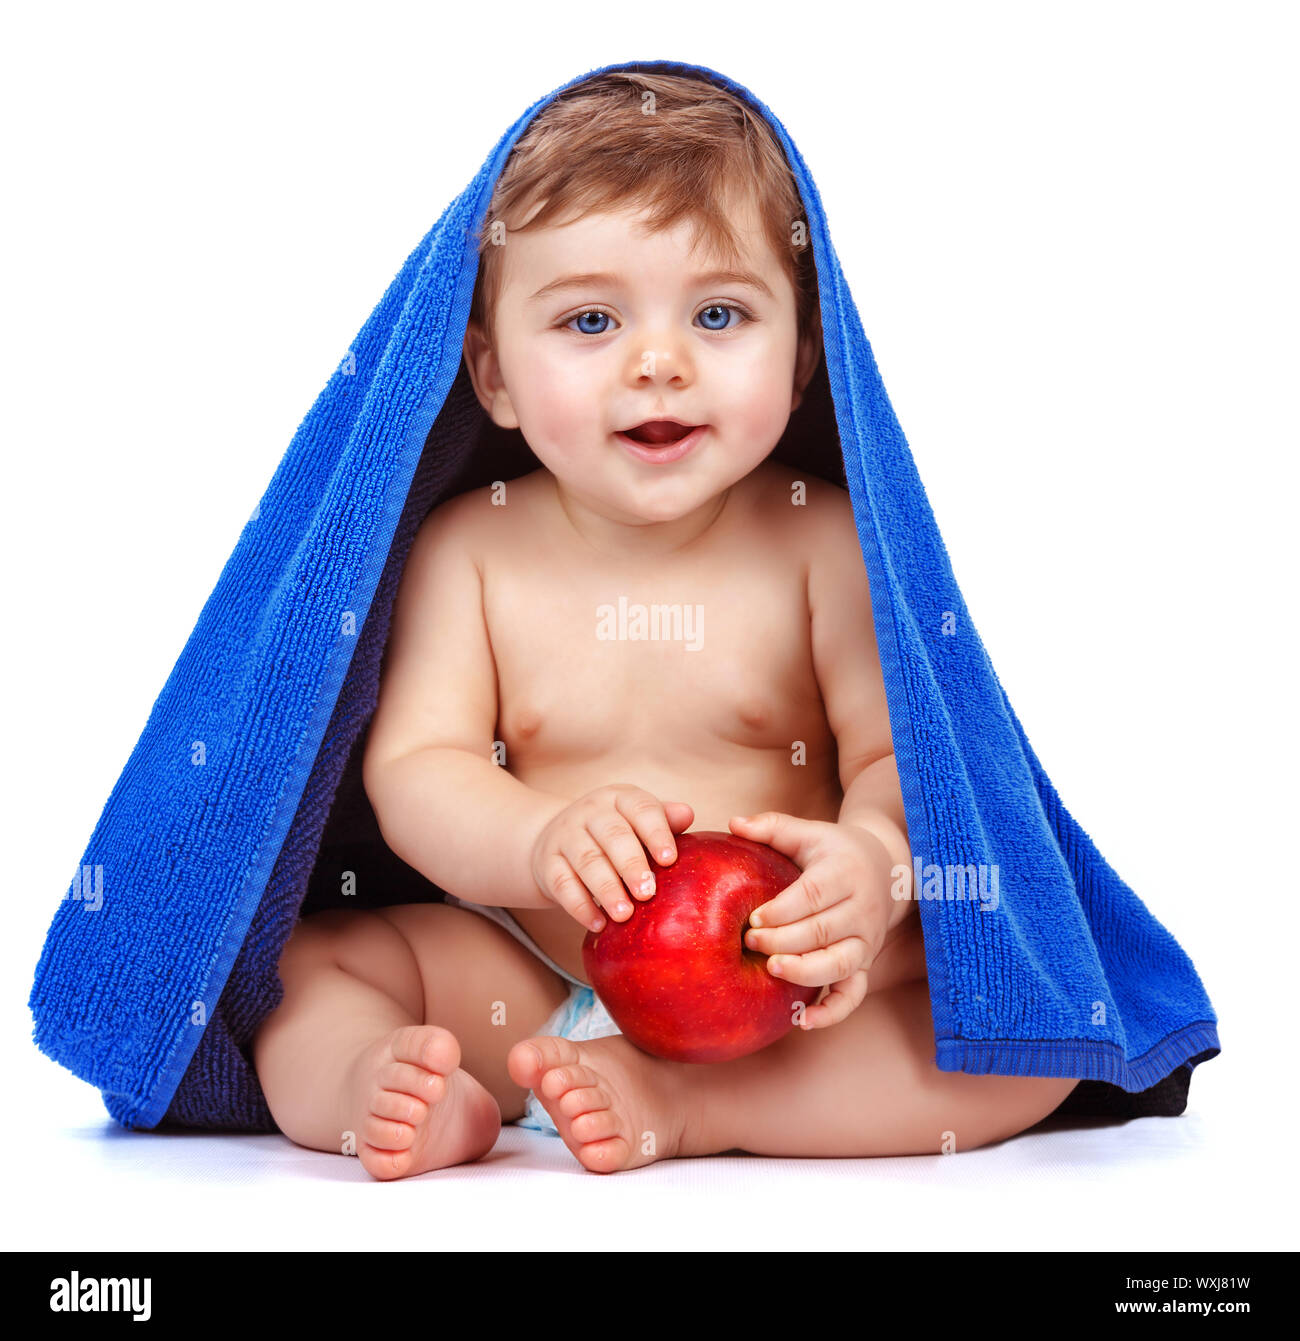 Cute baby boy covered with blue towel holding in hands red fresh ...